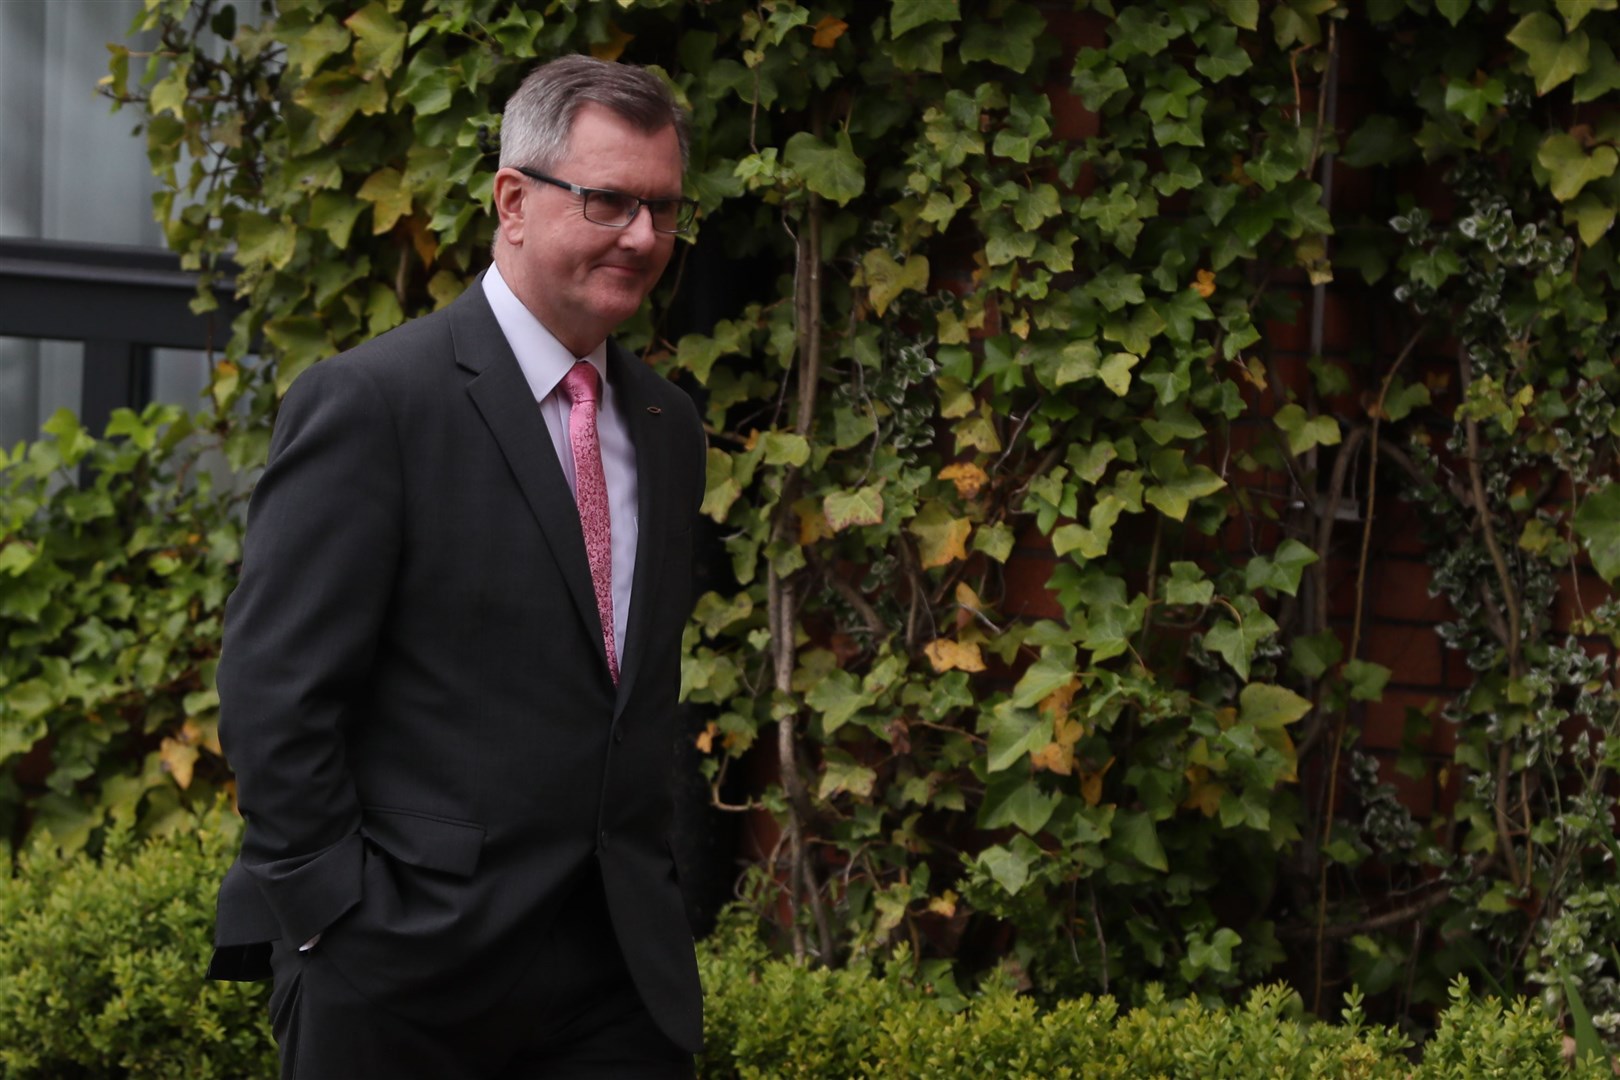 Lagan Valley MP Sir Jeffrey Donaldson arrives for the DUP meeting to ratify Edwin Poots as new leader in May (Brian Lawless/PA)